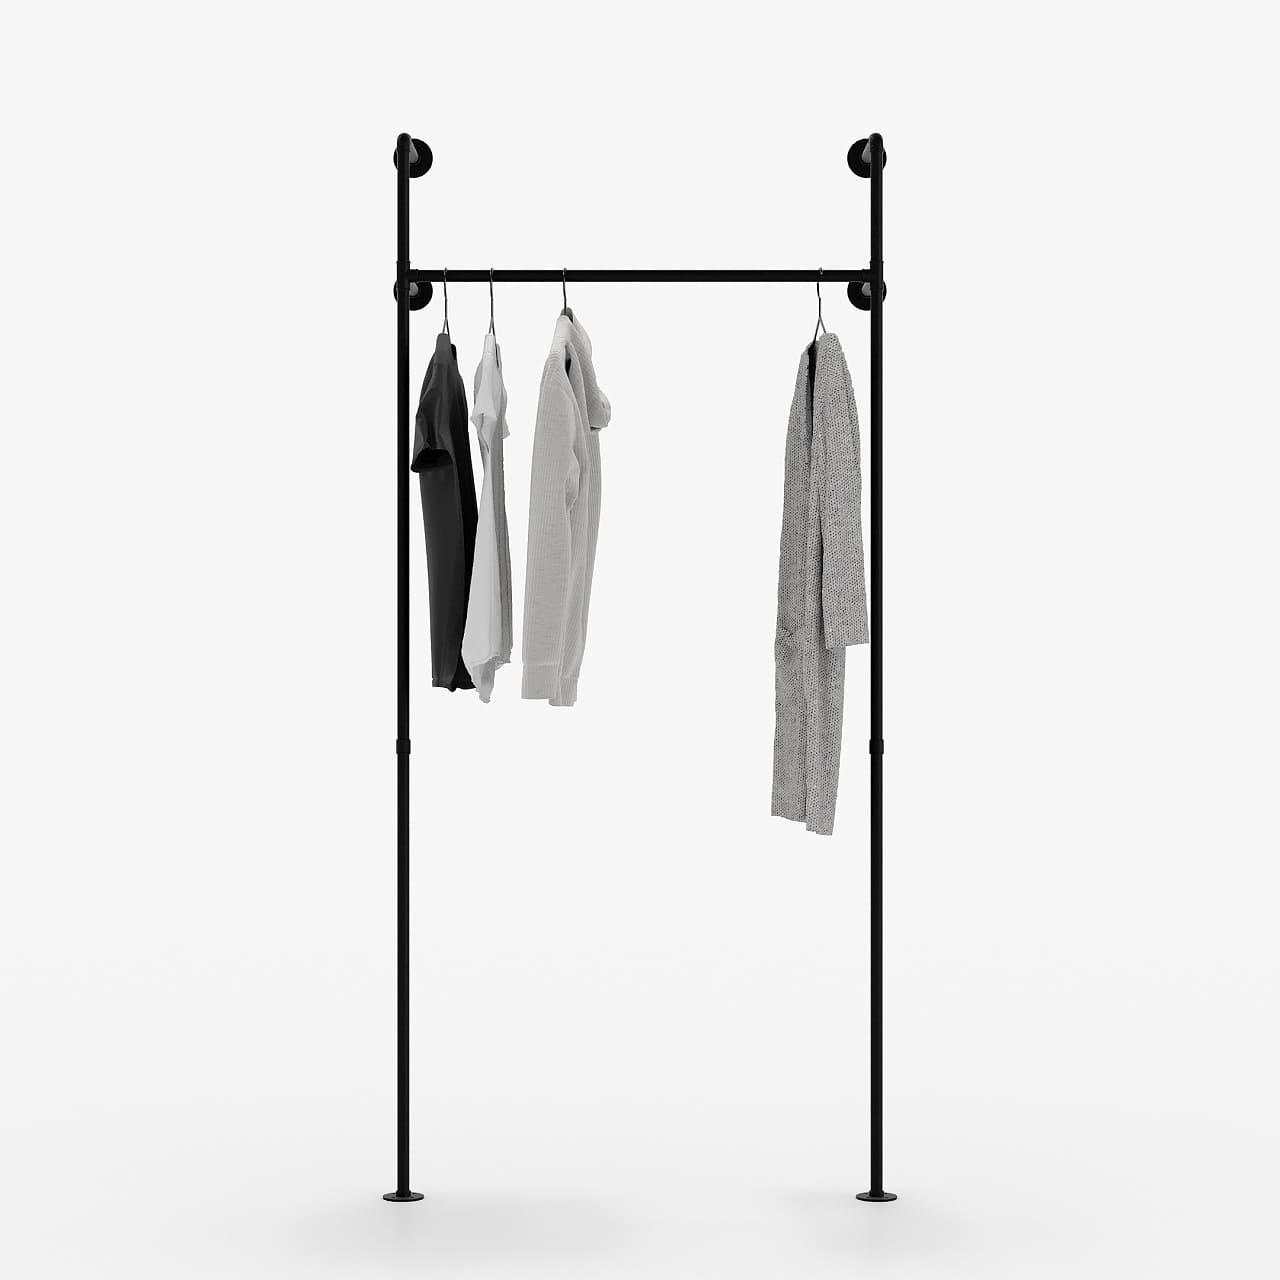  pamo freestanding Clothes Rail in Industrial loft